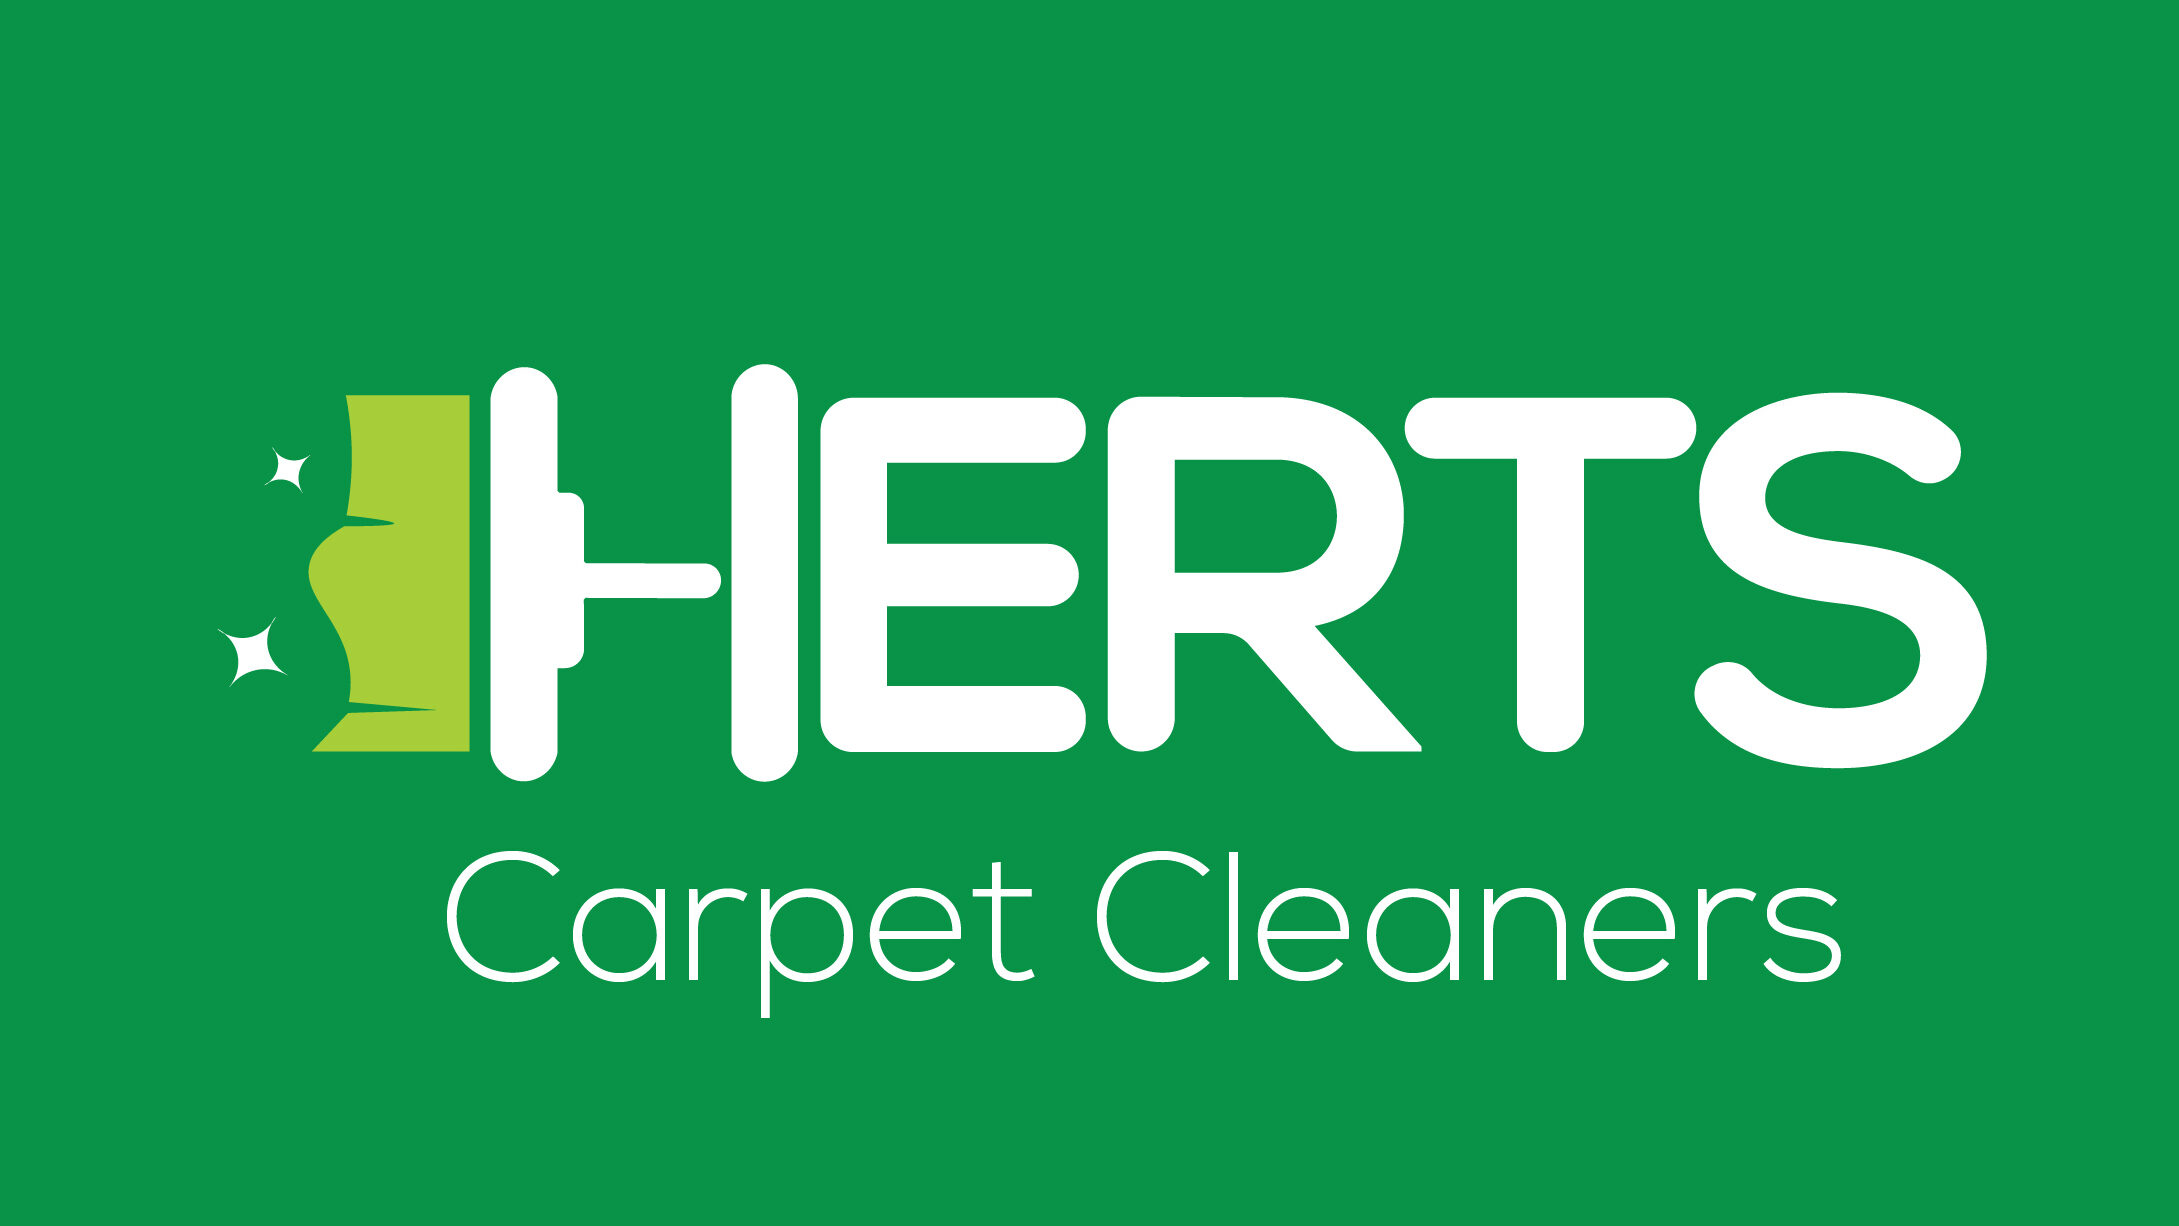 Herts Carpet Cleaning